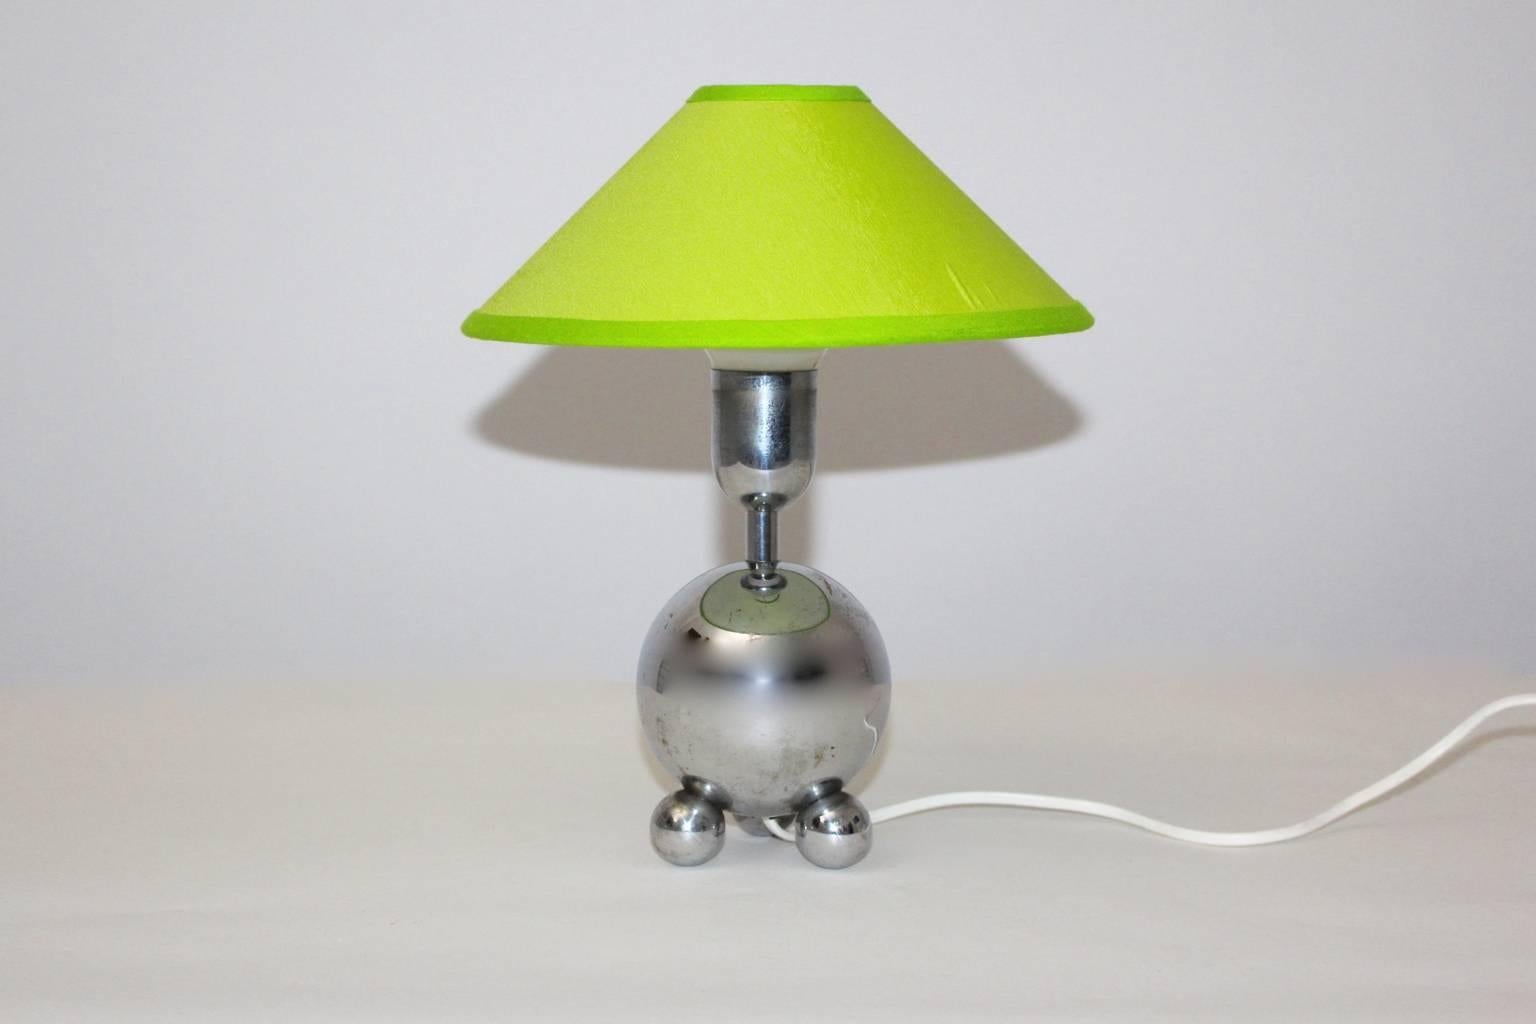 Mid Century Modern vintage table lamp from chromed metal designed and manufactured circa 1950 France.
A stunning graceful table lamp with a chromed base and a renewed lamp shade covered with lemon green textile fabric.
Furthermore the table lamp